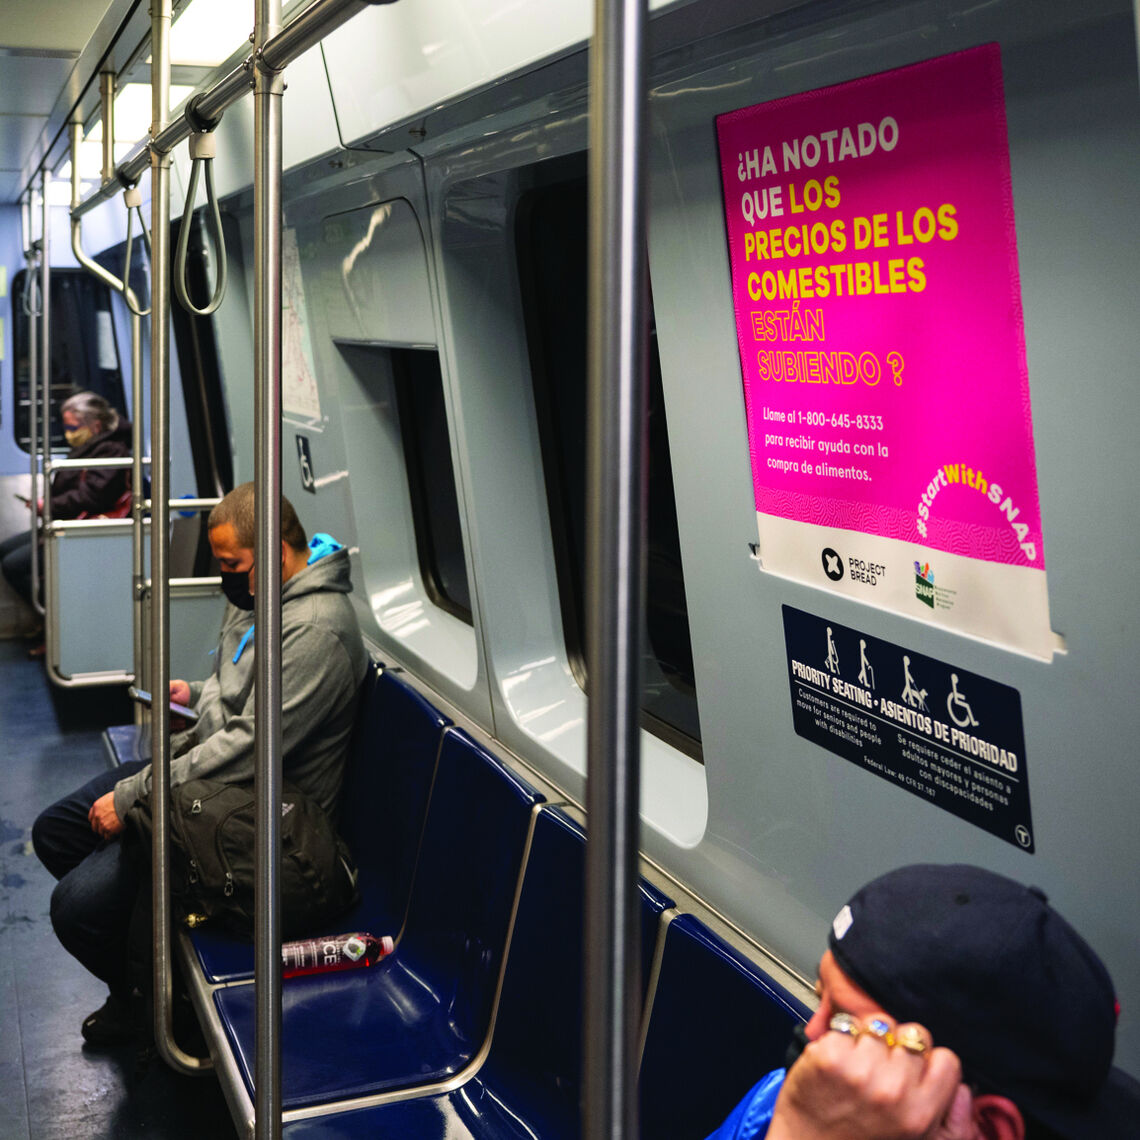 People are seated inside of a T car where an advertisement for SNAP is on the wall in Spanish